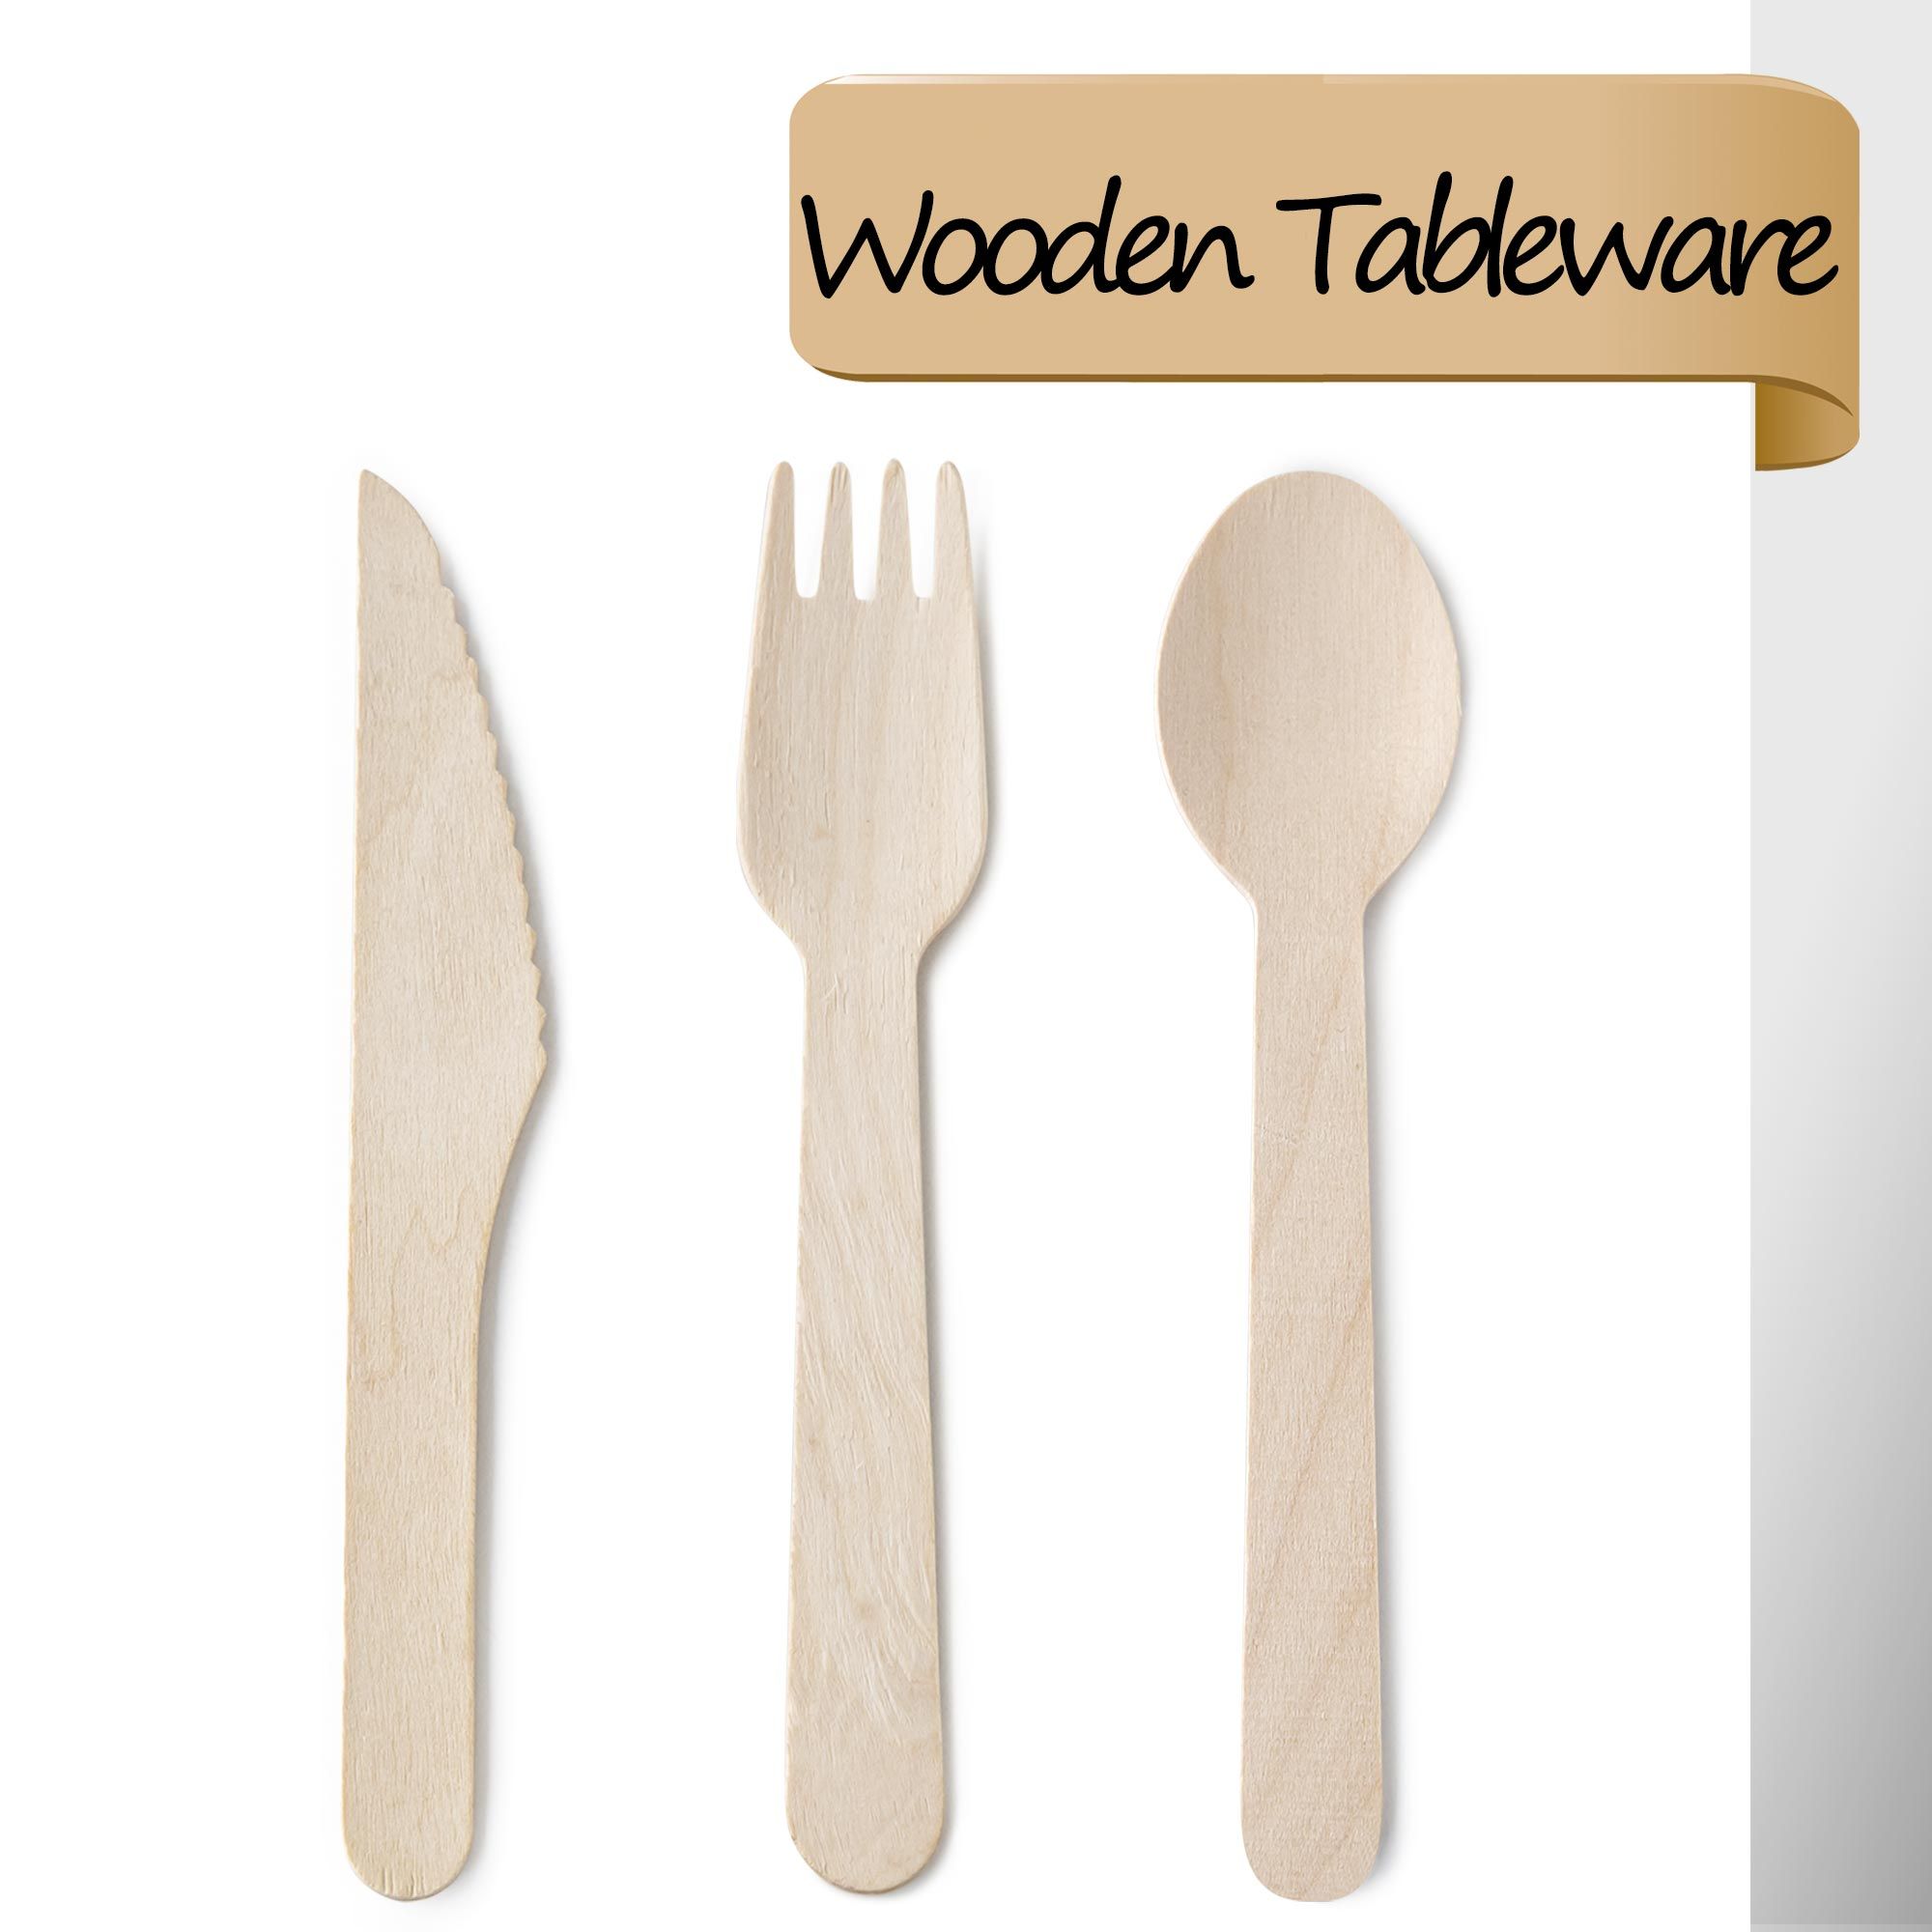 Wooden Disposable Tableware